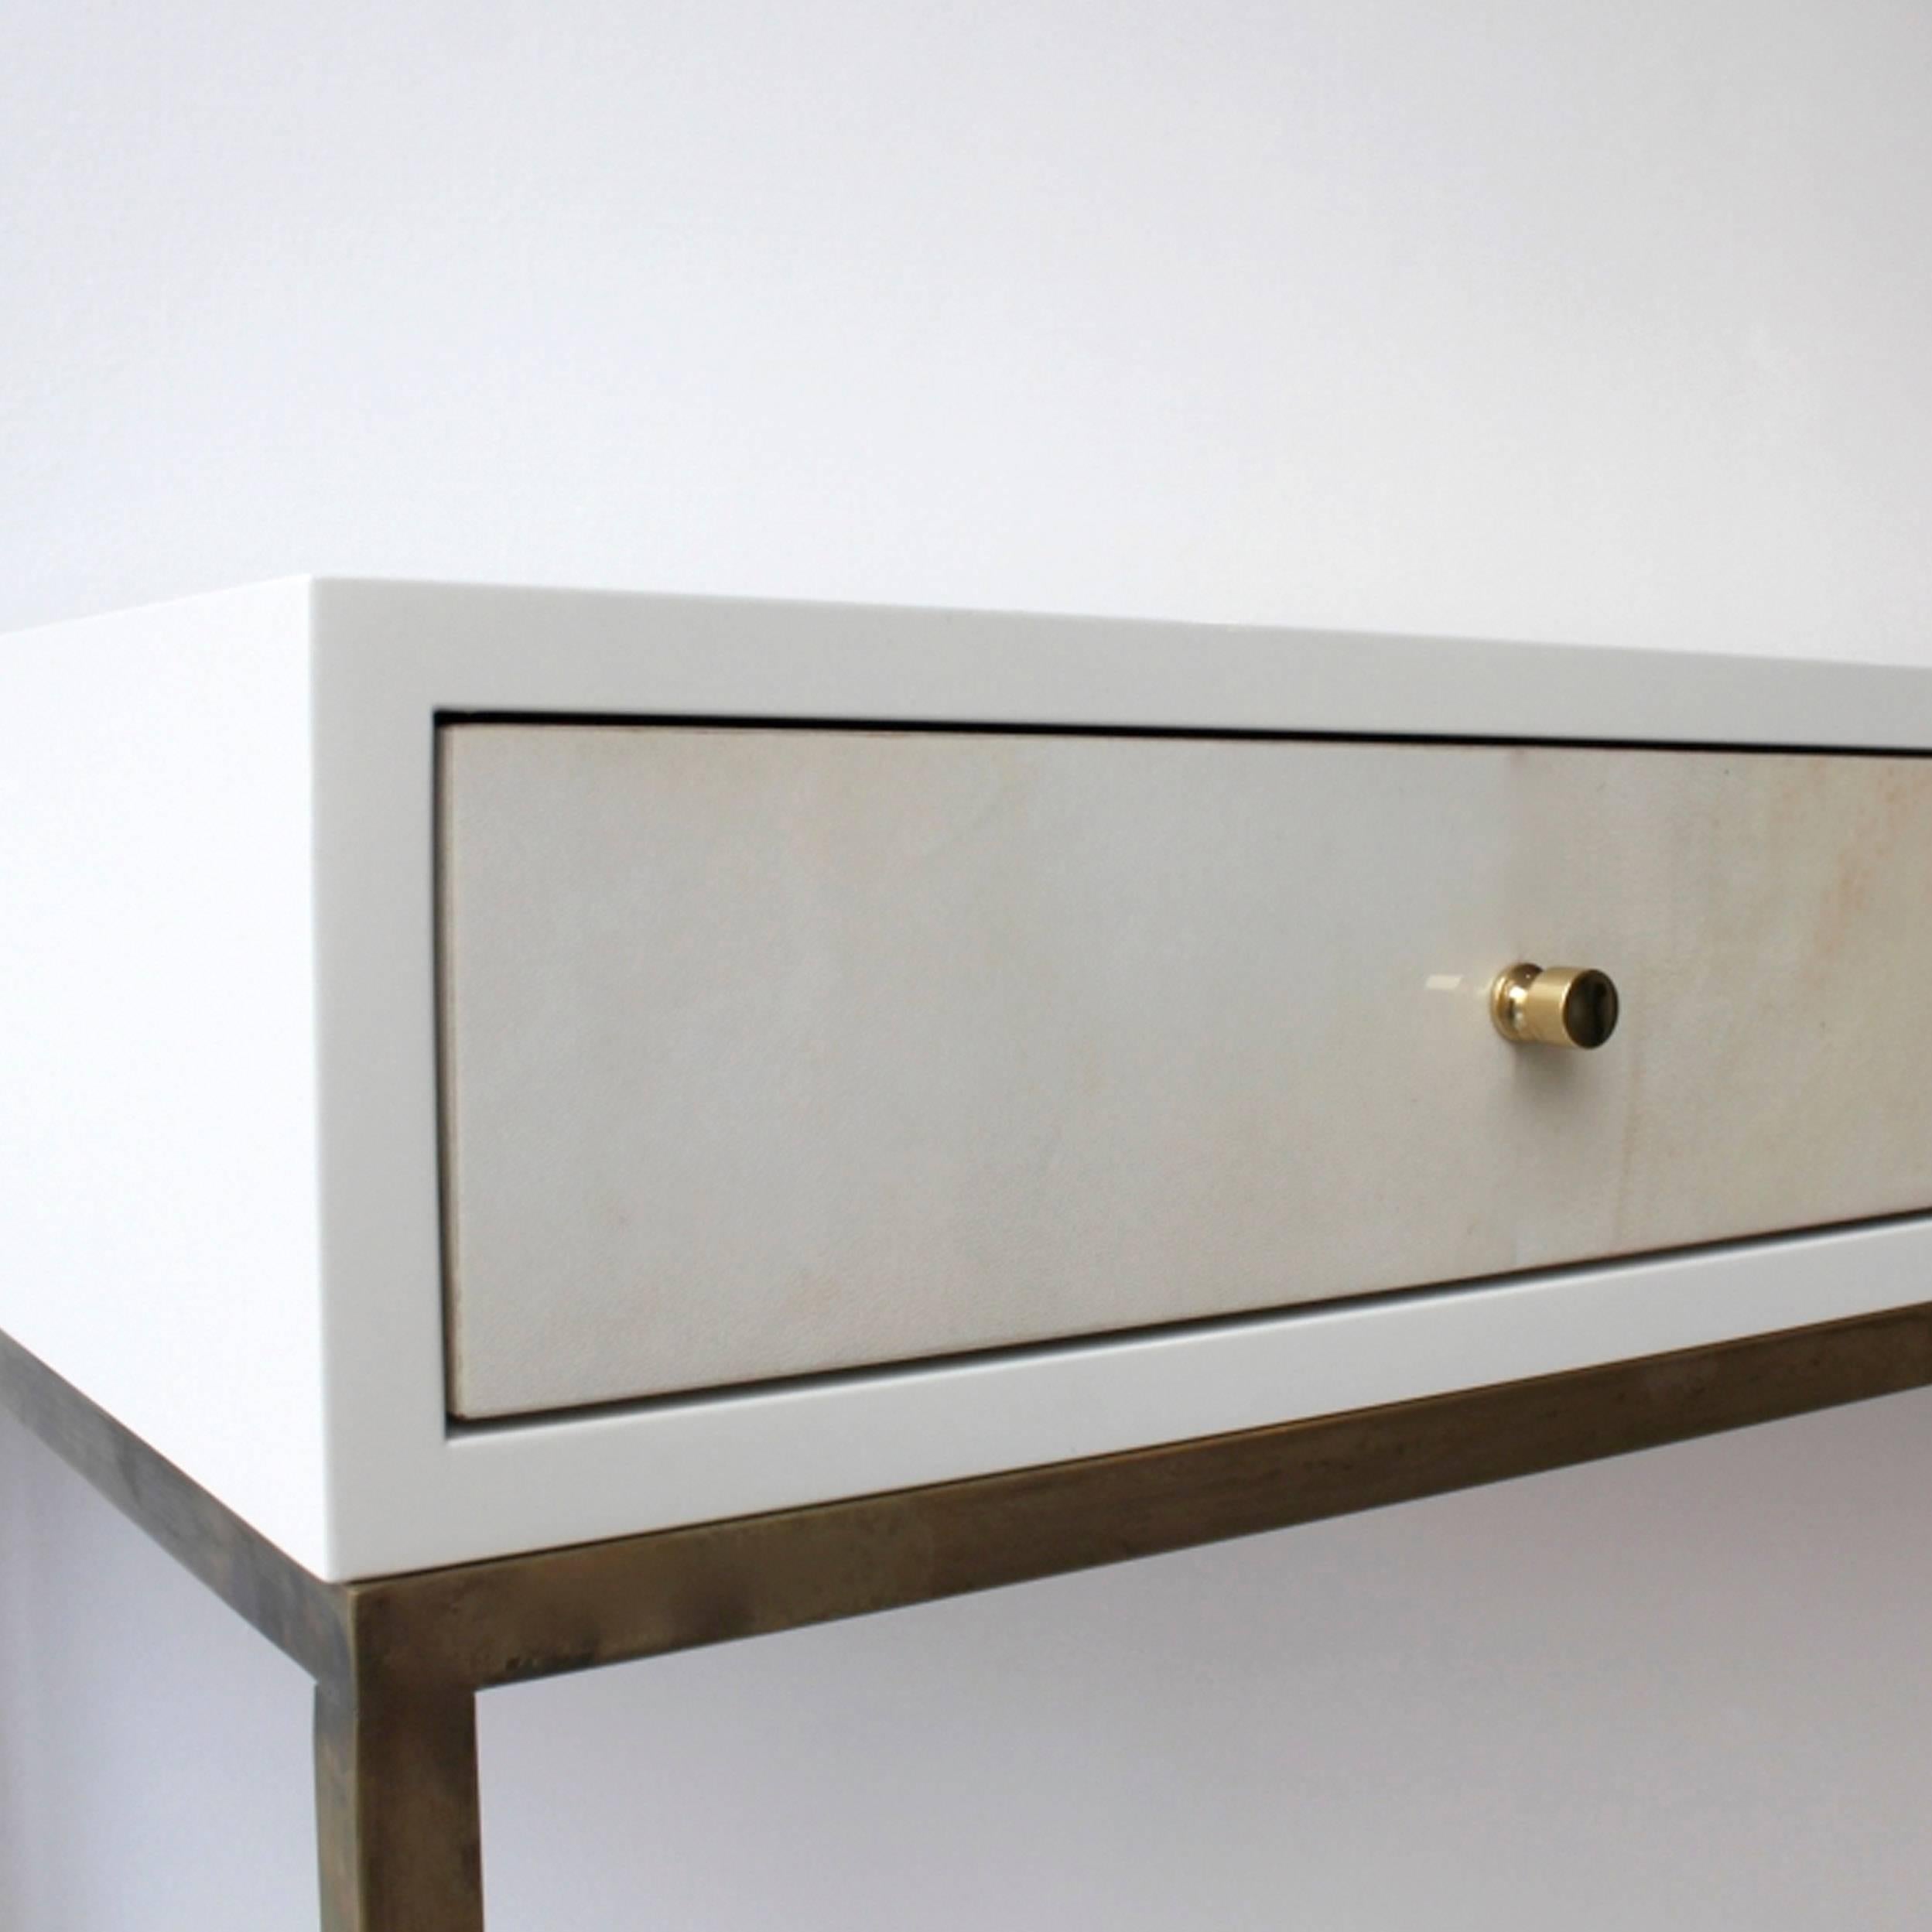 White (RAL 9001) piano lacquered bedside table with brass lined drawer, antique brass frame base, vellum parchment front drawer detail and brass pull knob.

W55 x D50 x H65 cm

Currently in stock available for an immediate dispatch